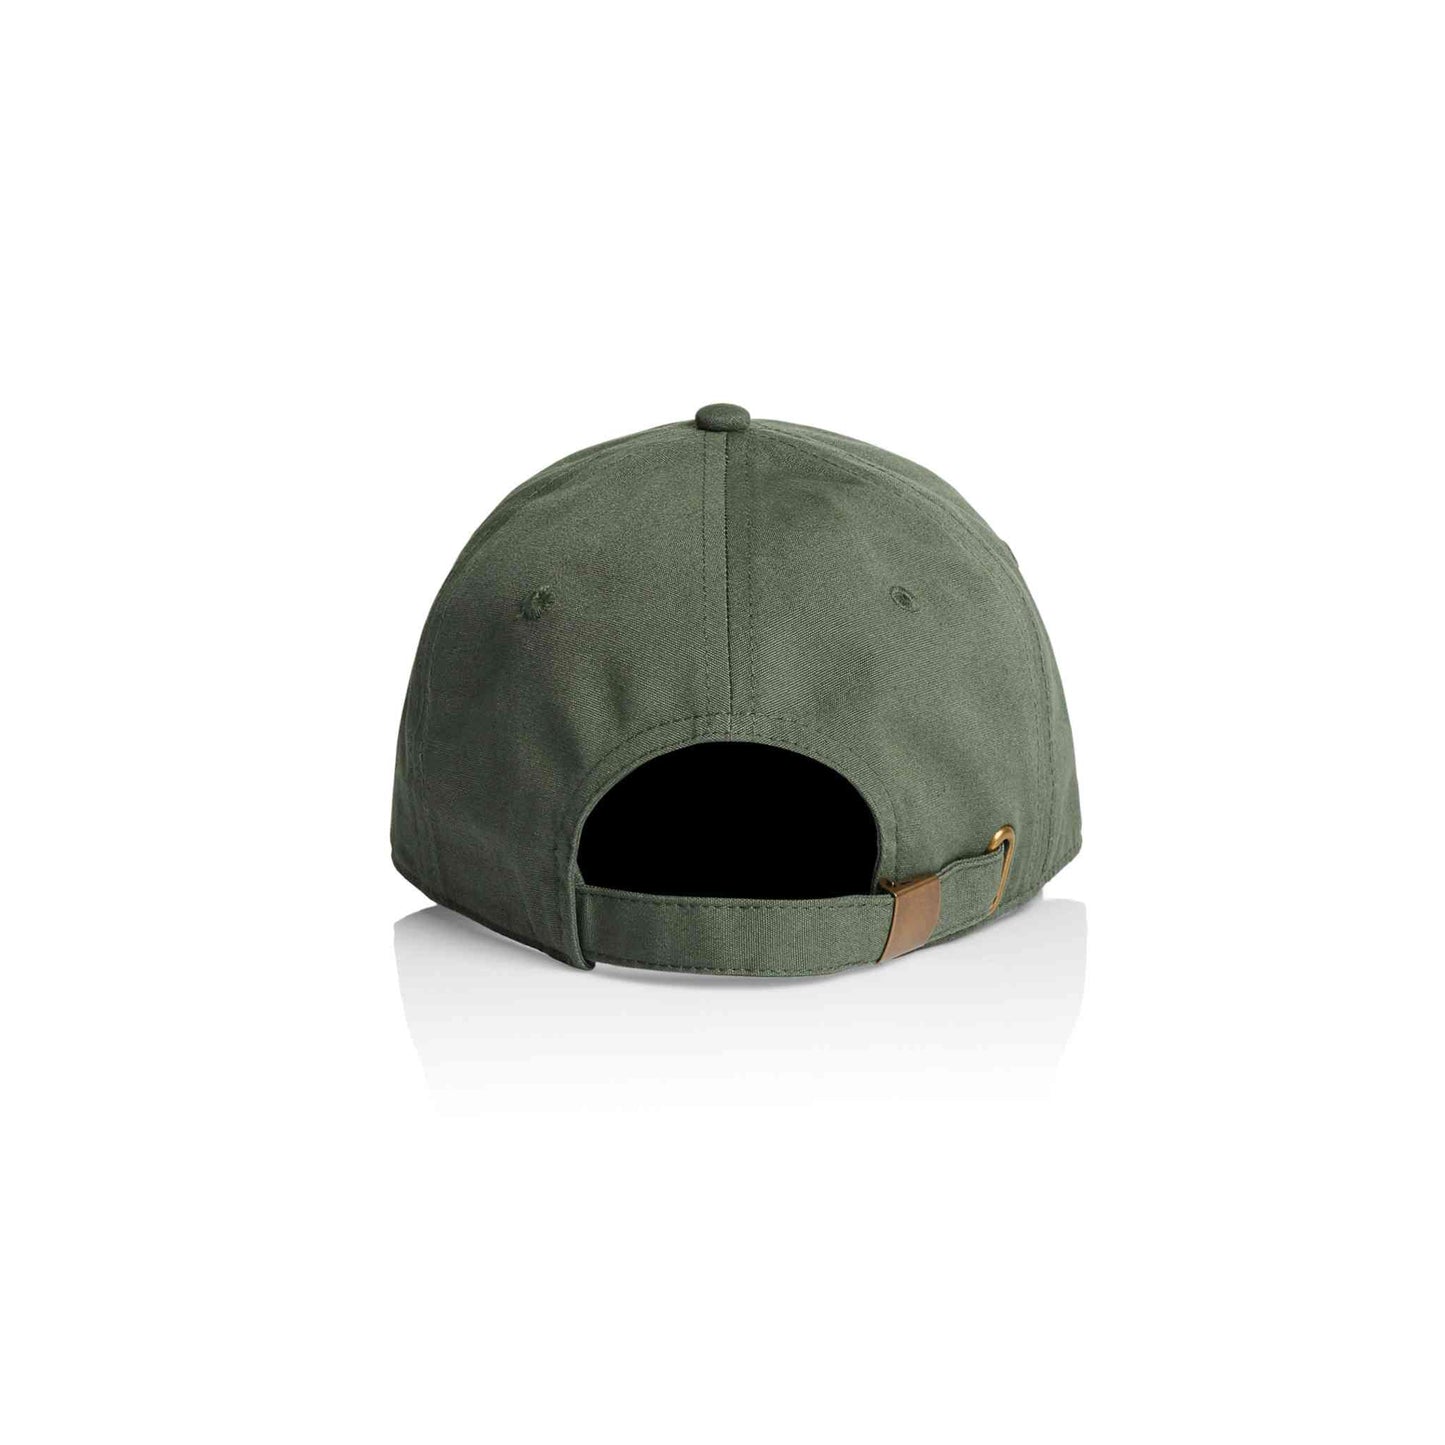 AS Colour 1130 Access 6 panel cap in cypress colour, back view